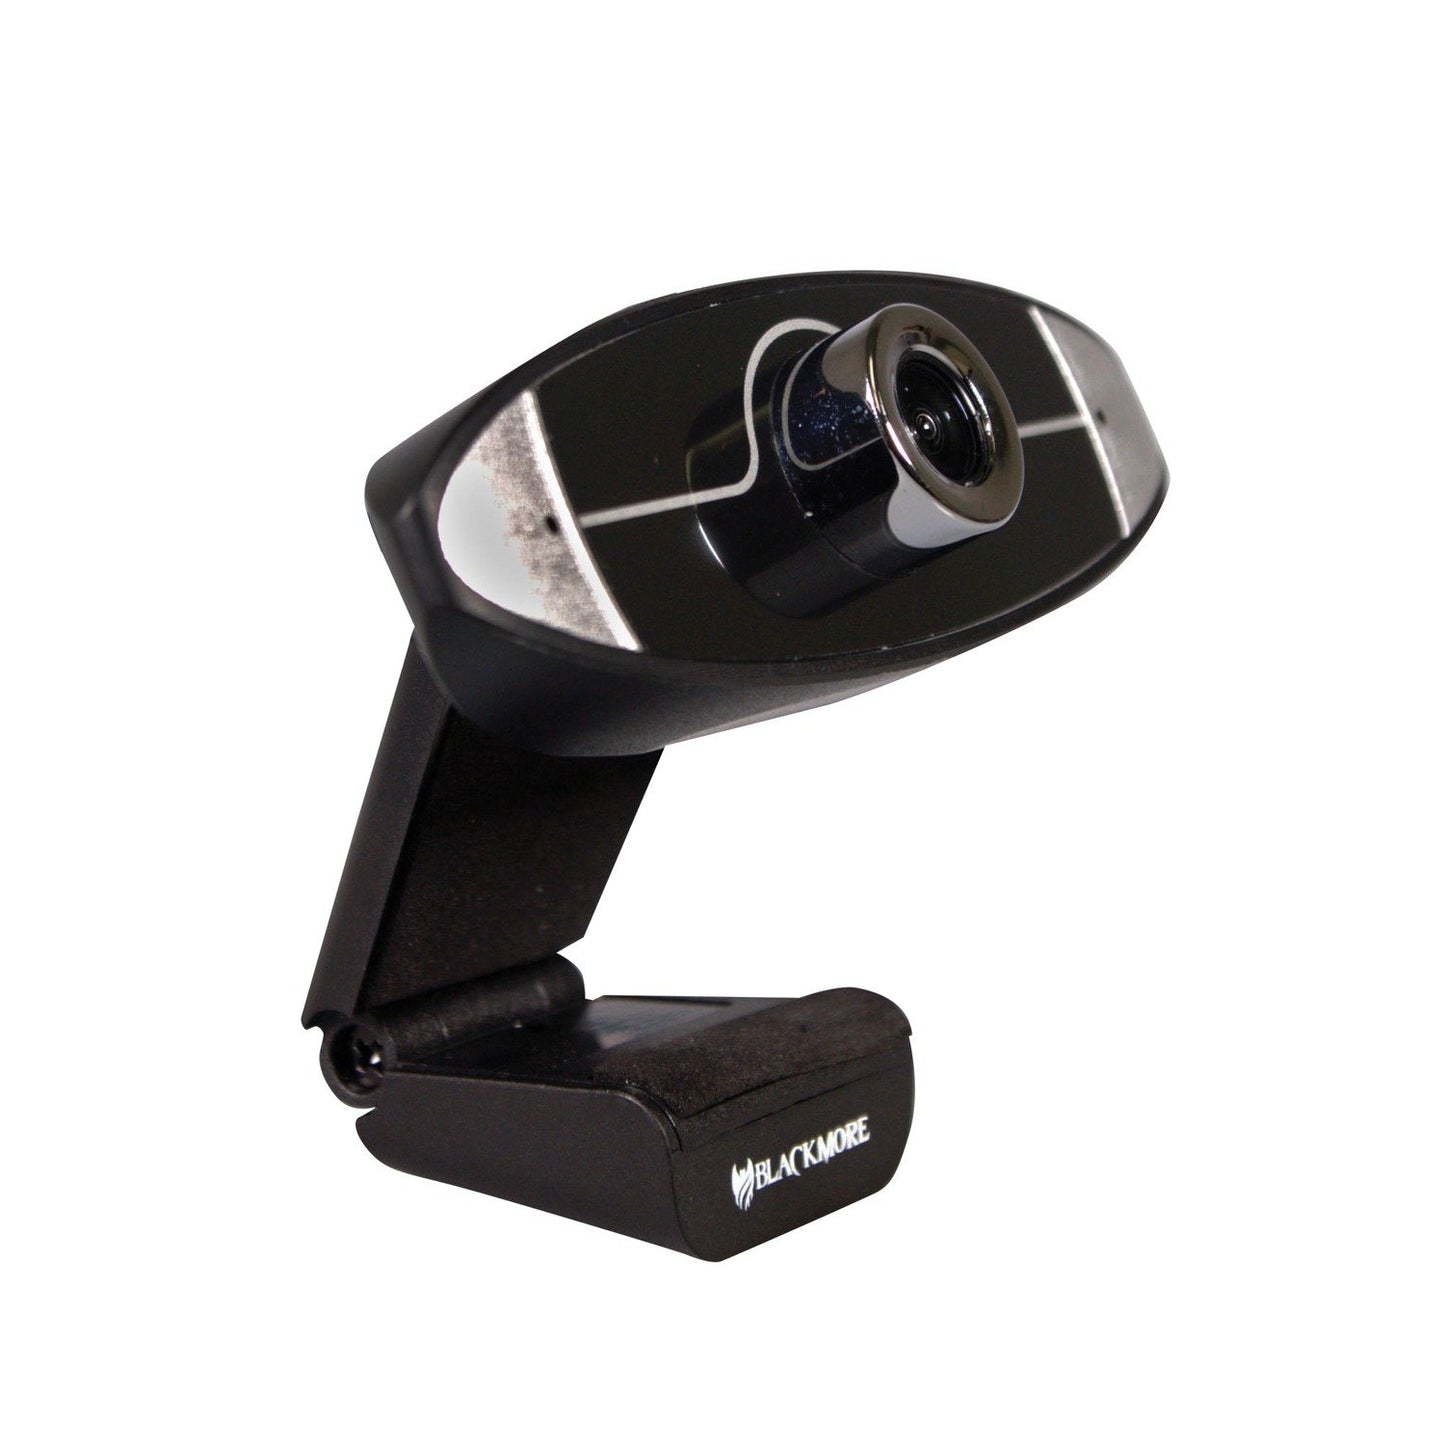 Blackmore Pro Audio BWC-903 USB 1080p Webcam with Built-In Microphone